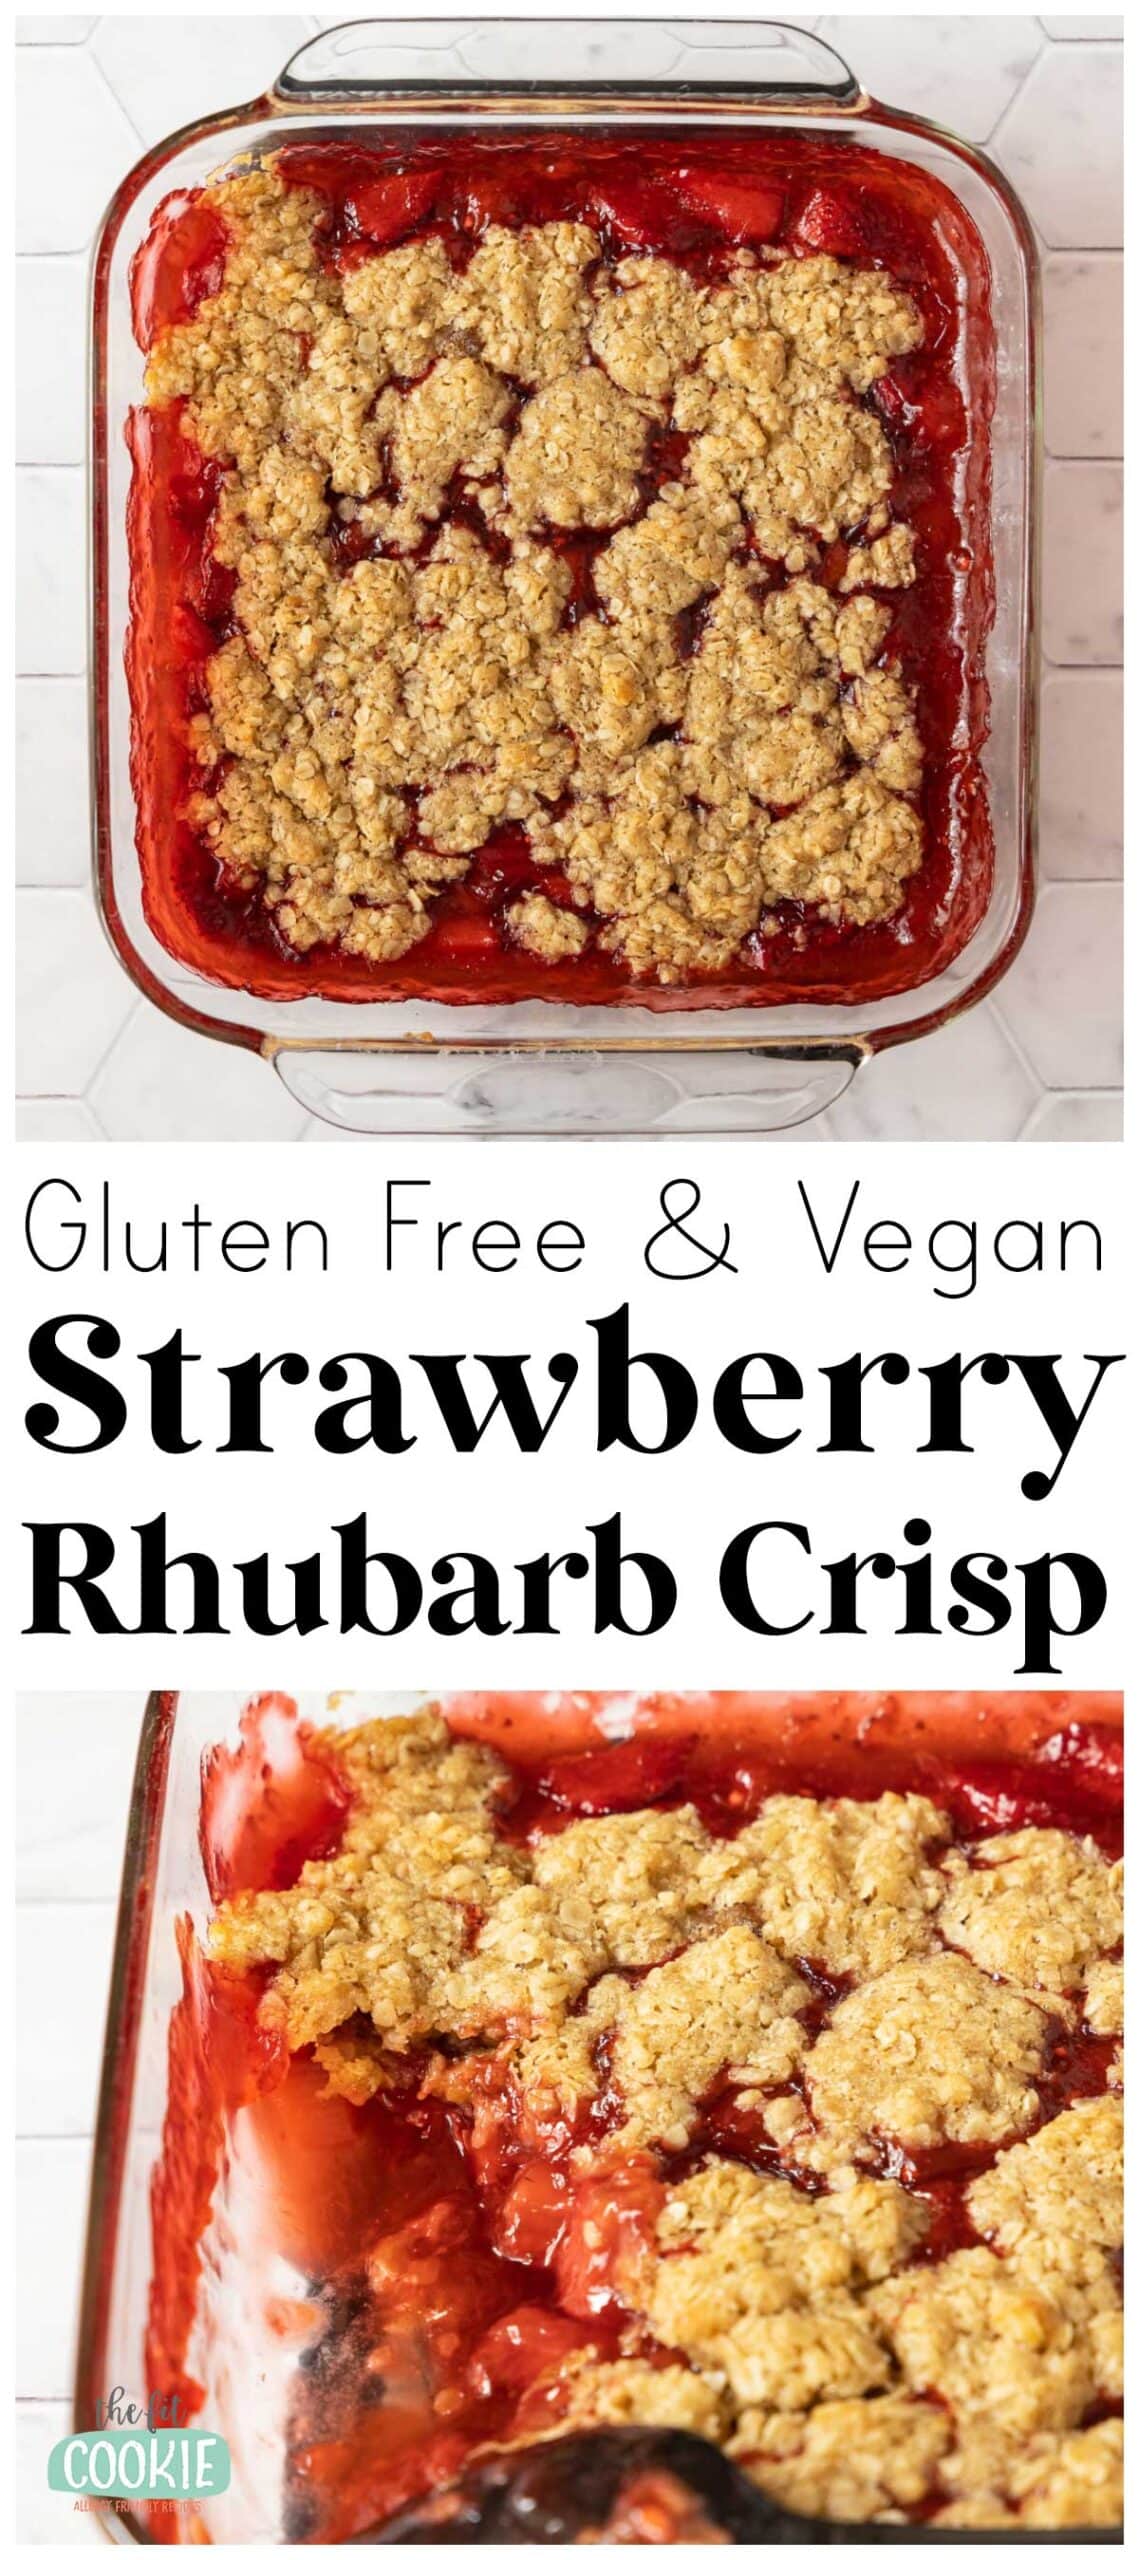 photo collage of strawberry rhubarb crisp in a glass pan.